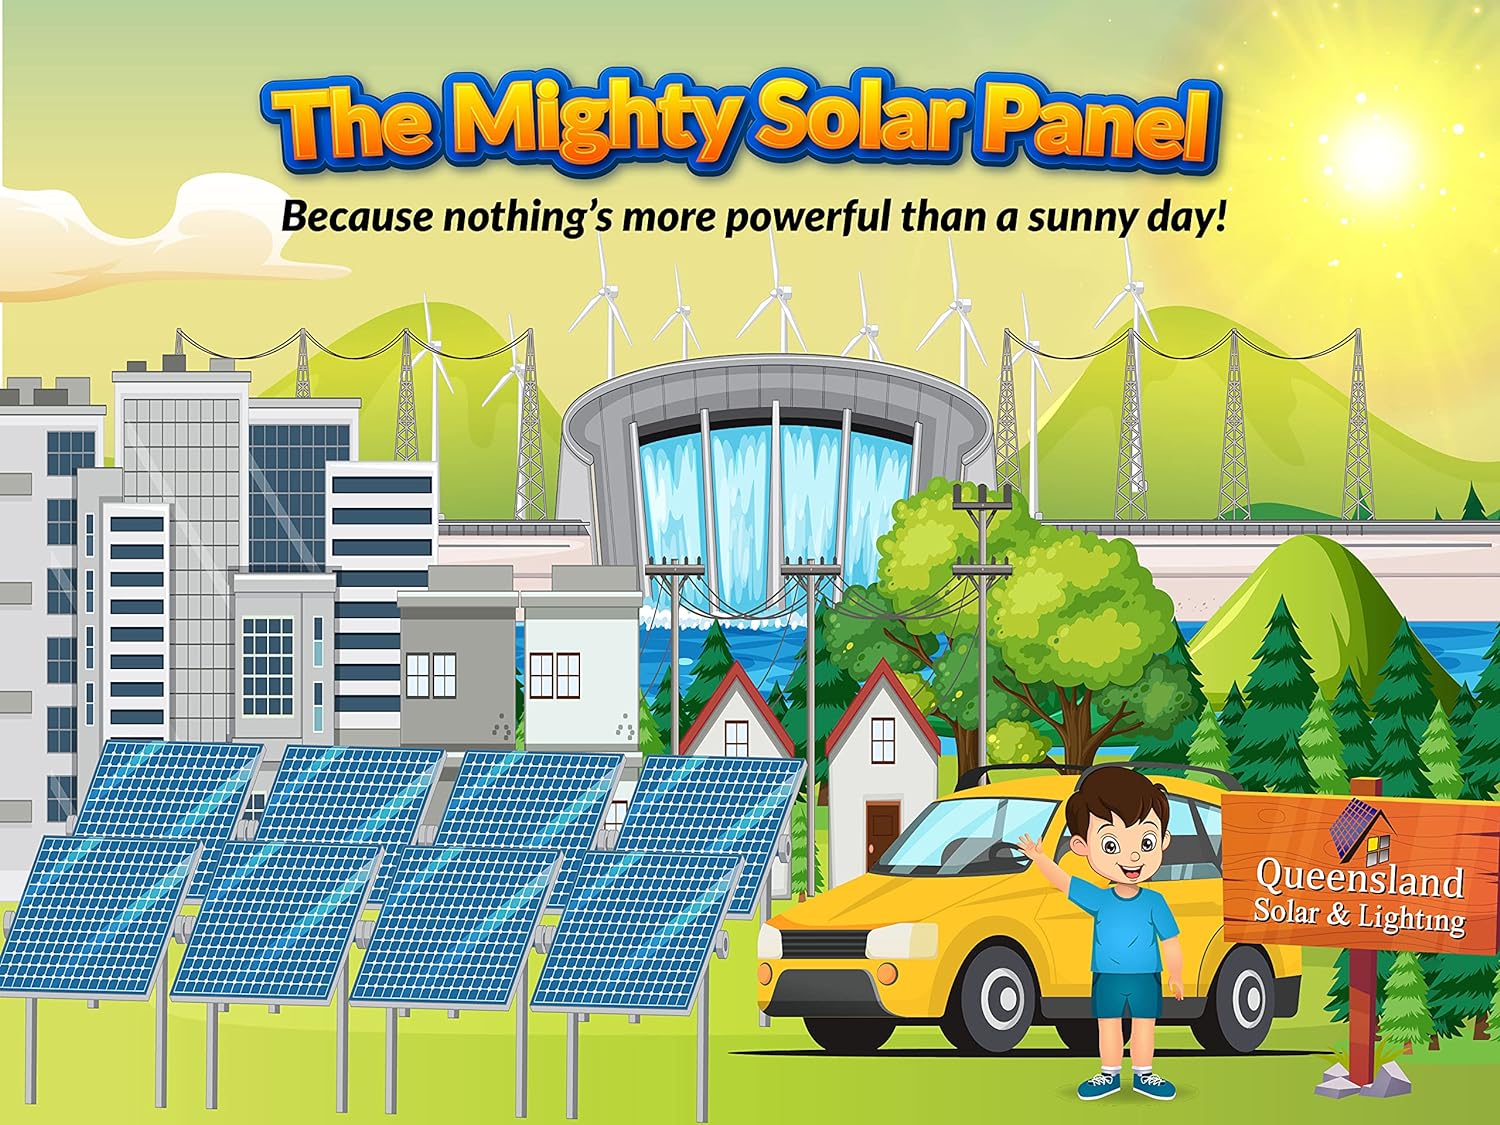 The front cover of The Mighty Solar Panel: Because Nothing's More Powerful Than a Sunny Day! by Daniel Jarrett